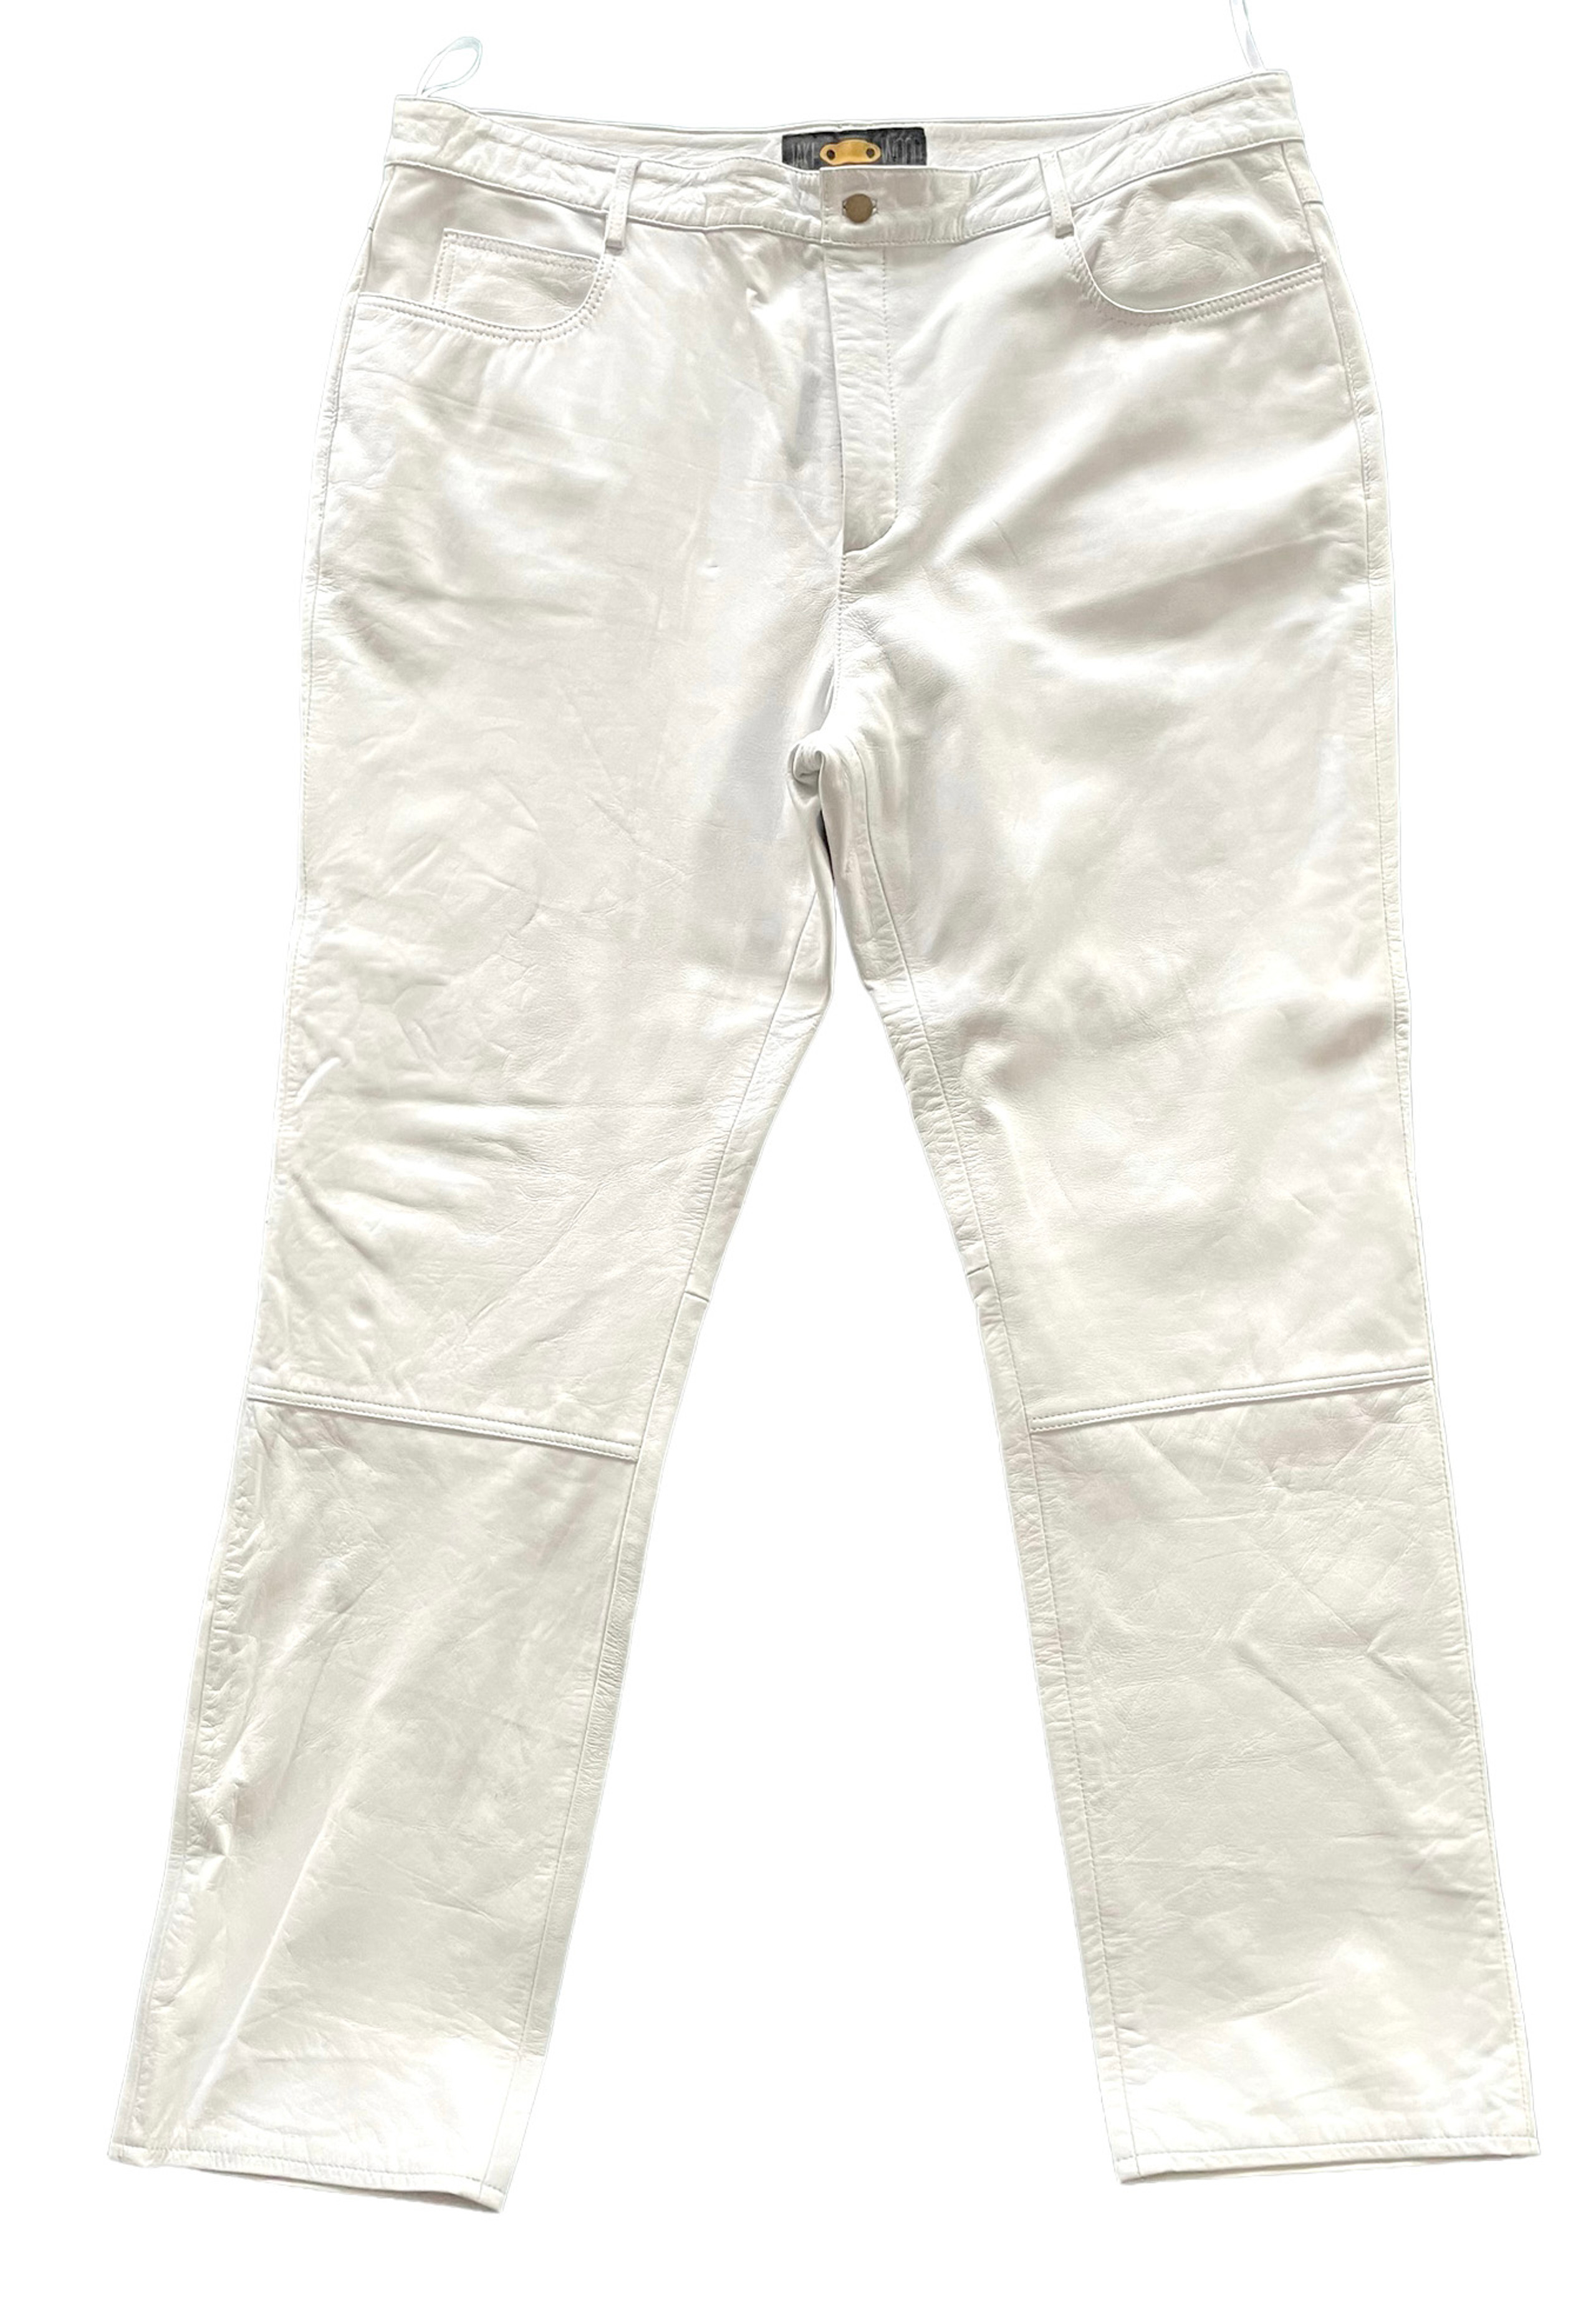 White Butter Soft leather Pants | HipHopCloset.com